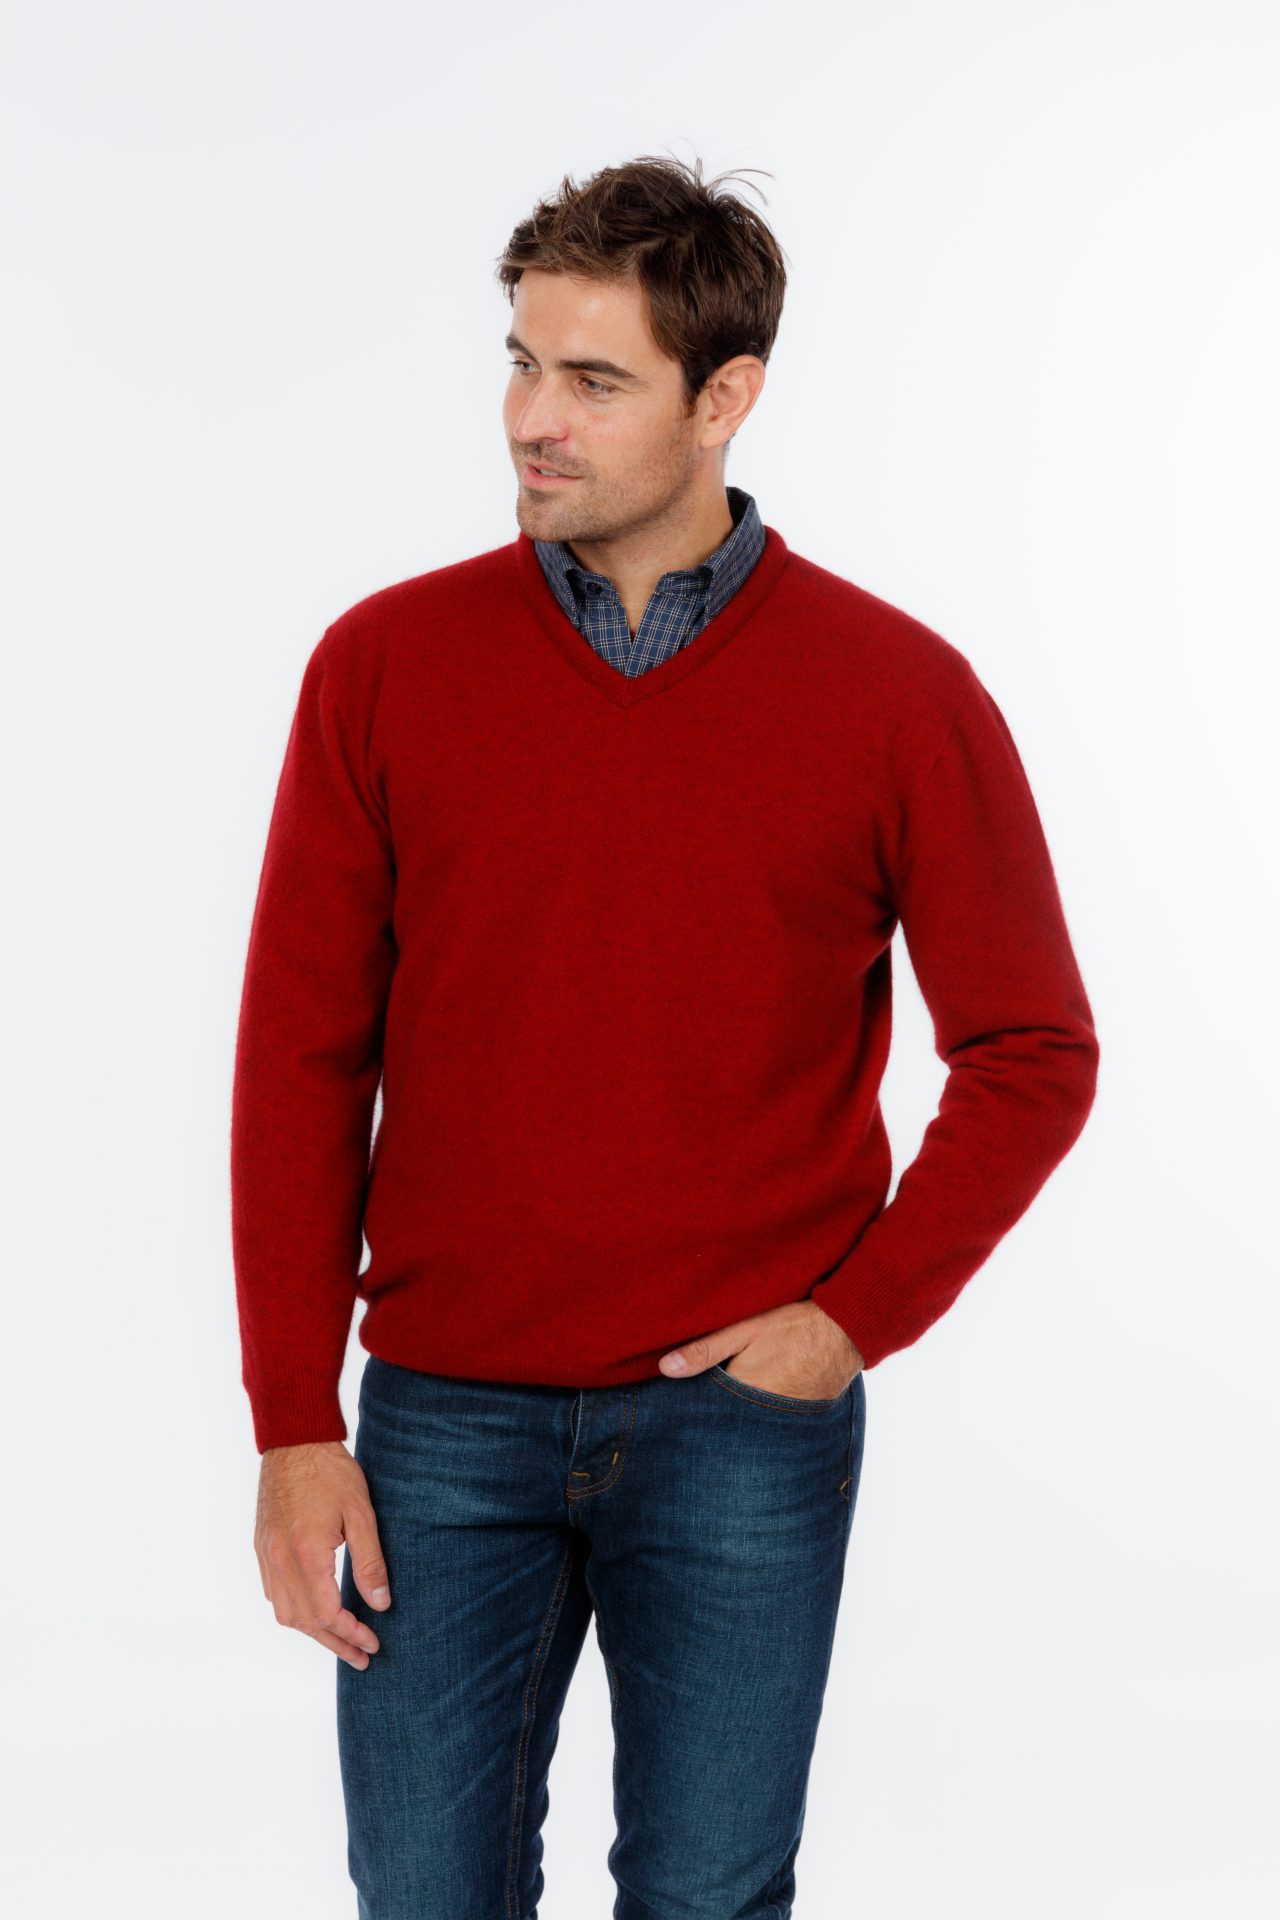 NB121 Vee Neck Sweater - The Woolshed